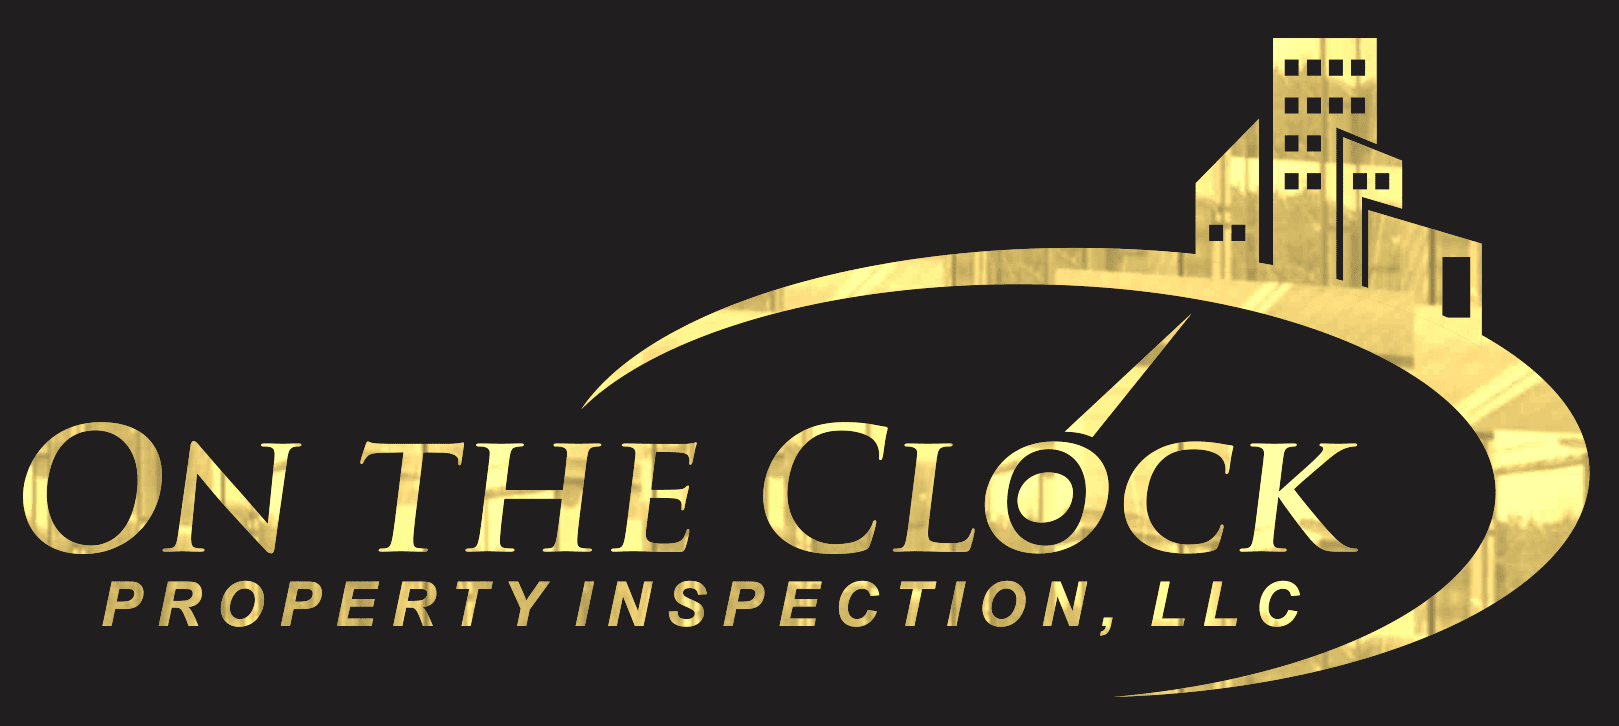 On the Clock Property Inspections, LLC